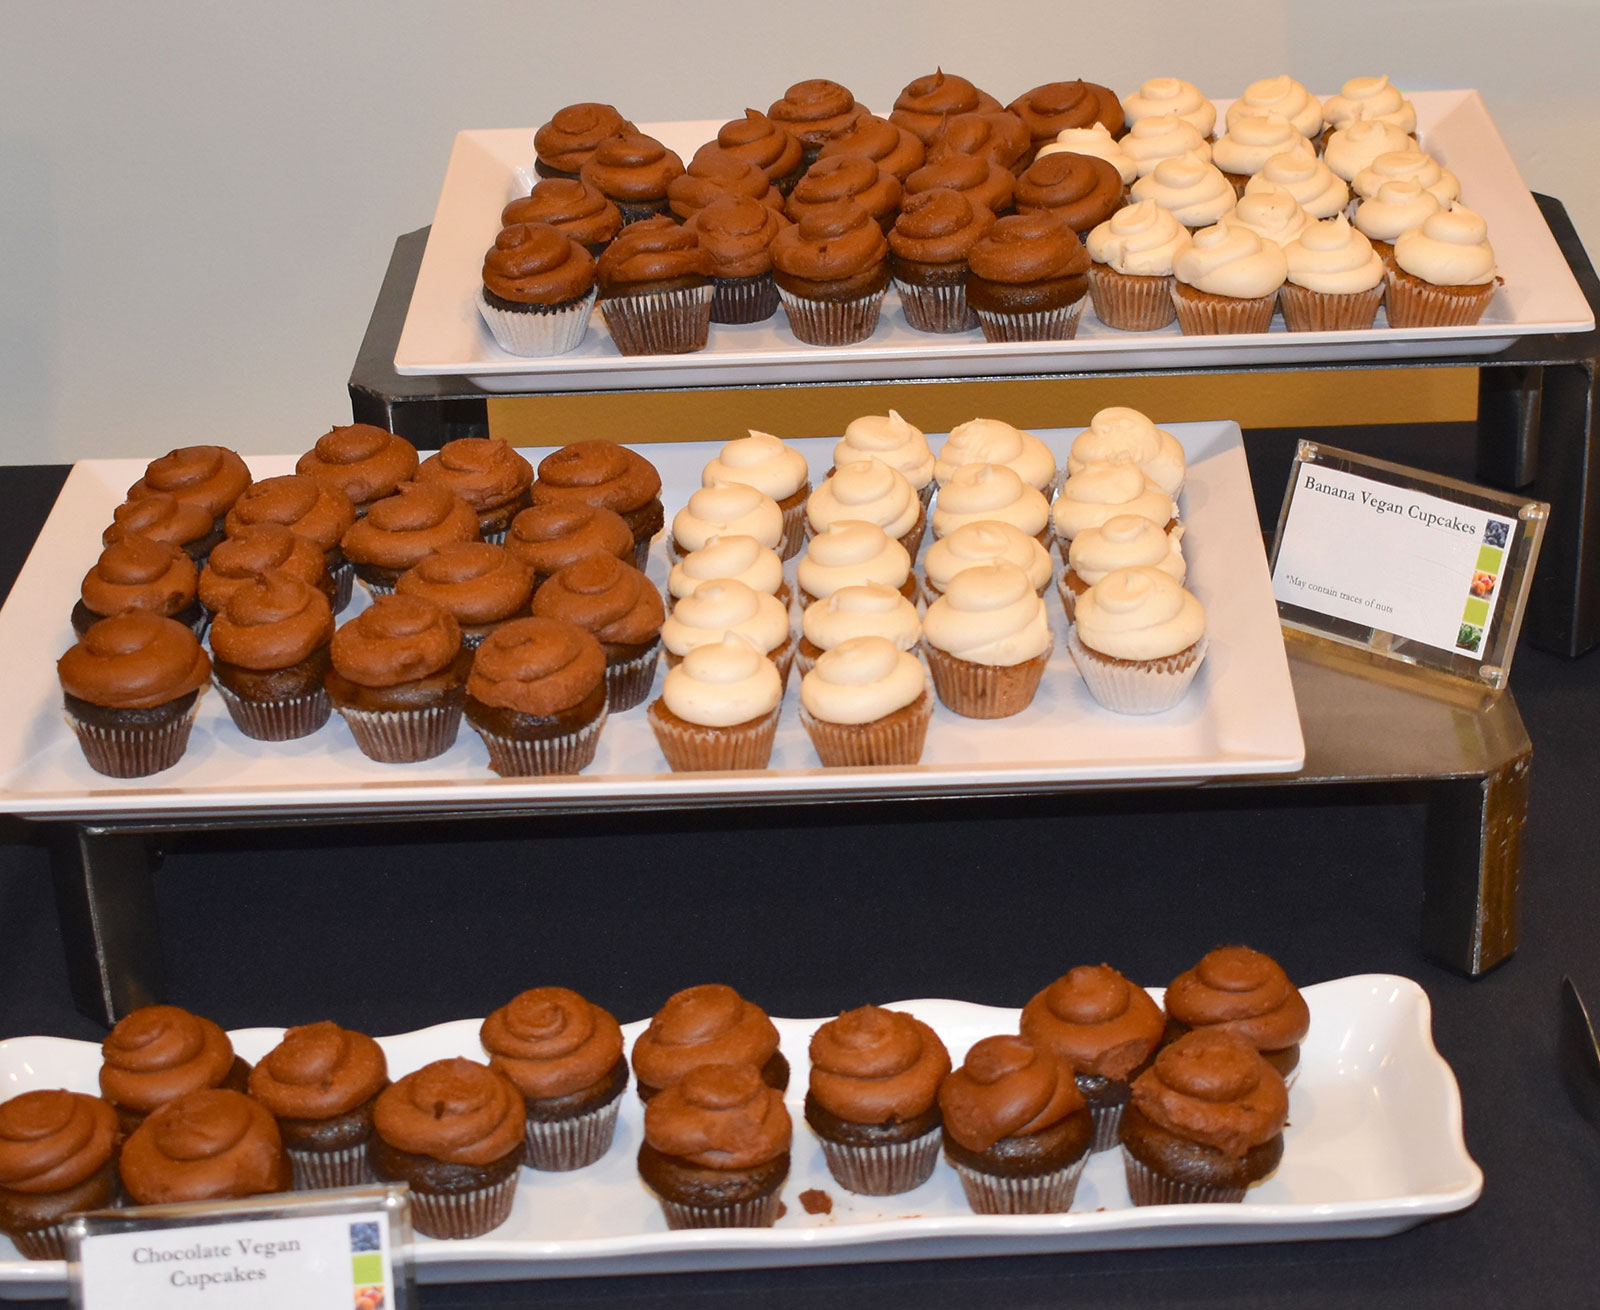 "The Game Changers" reception - vegan cupcakes